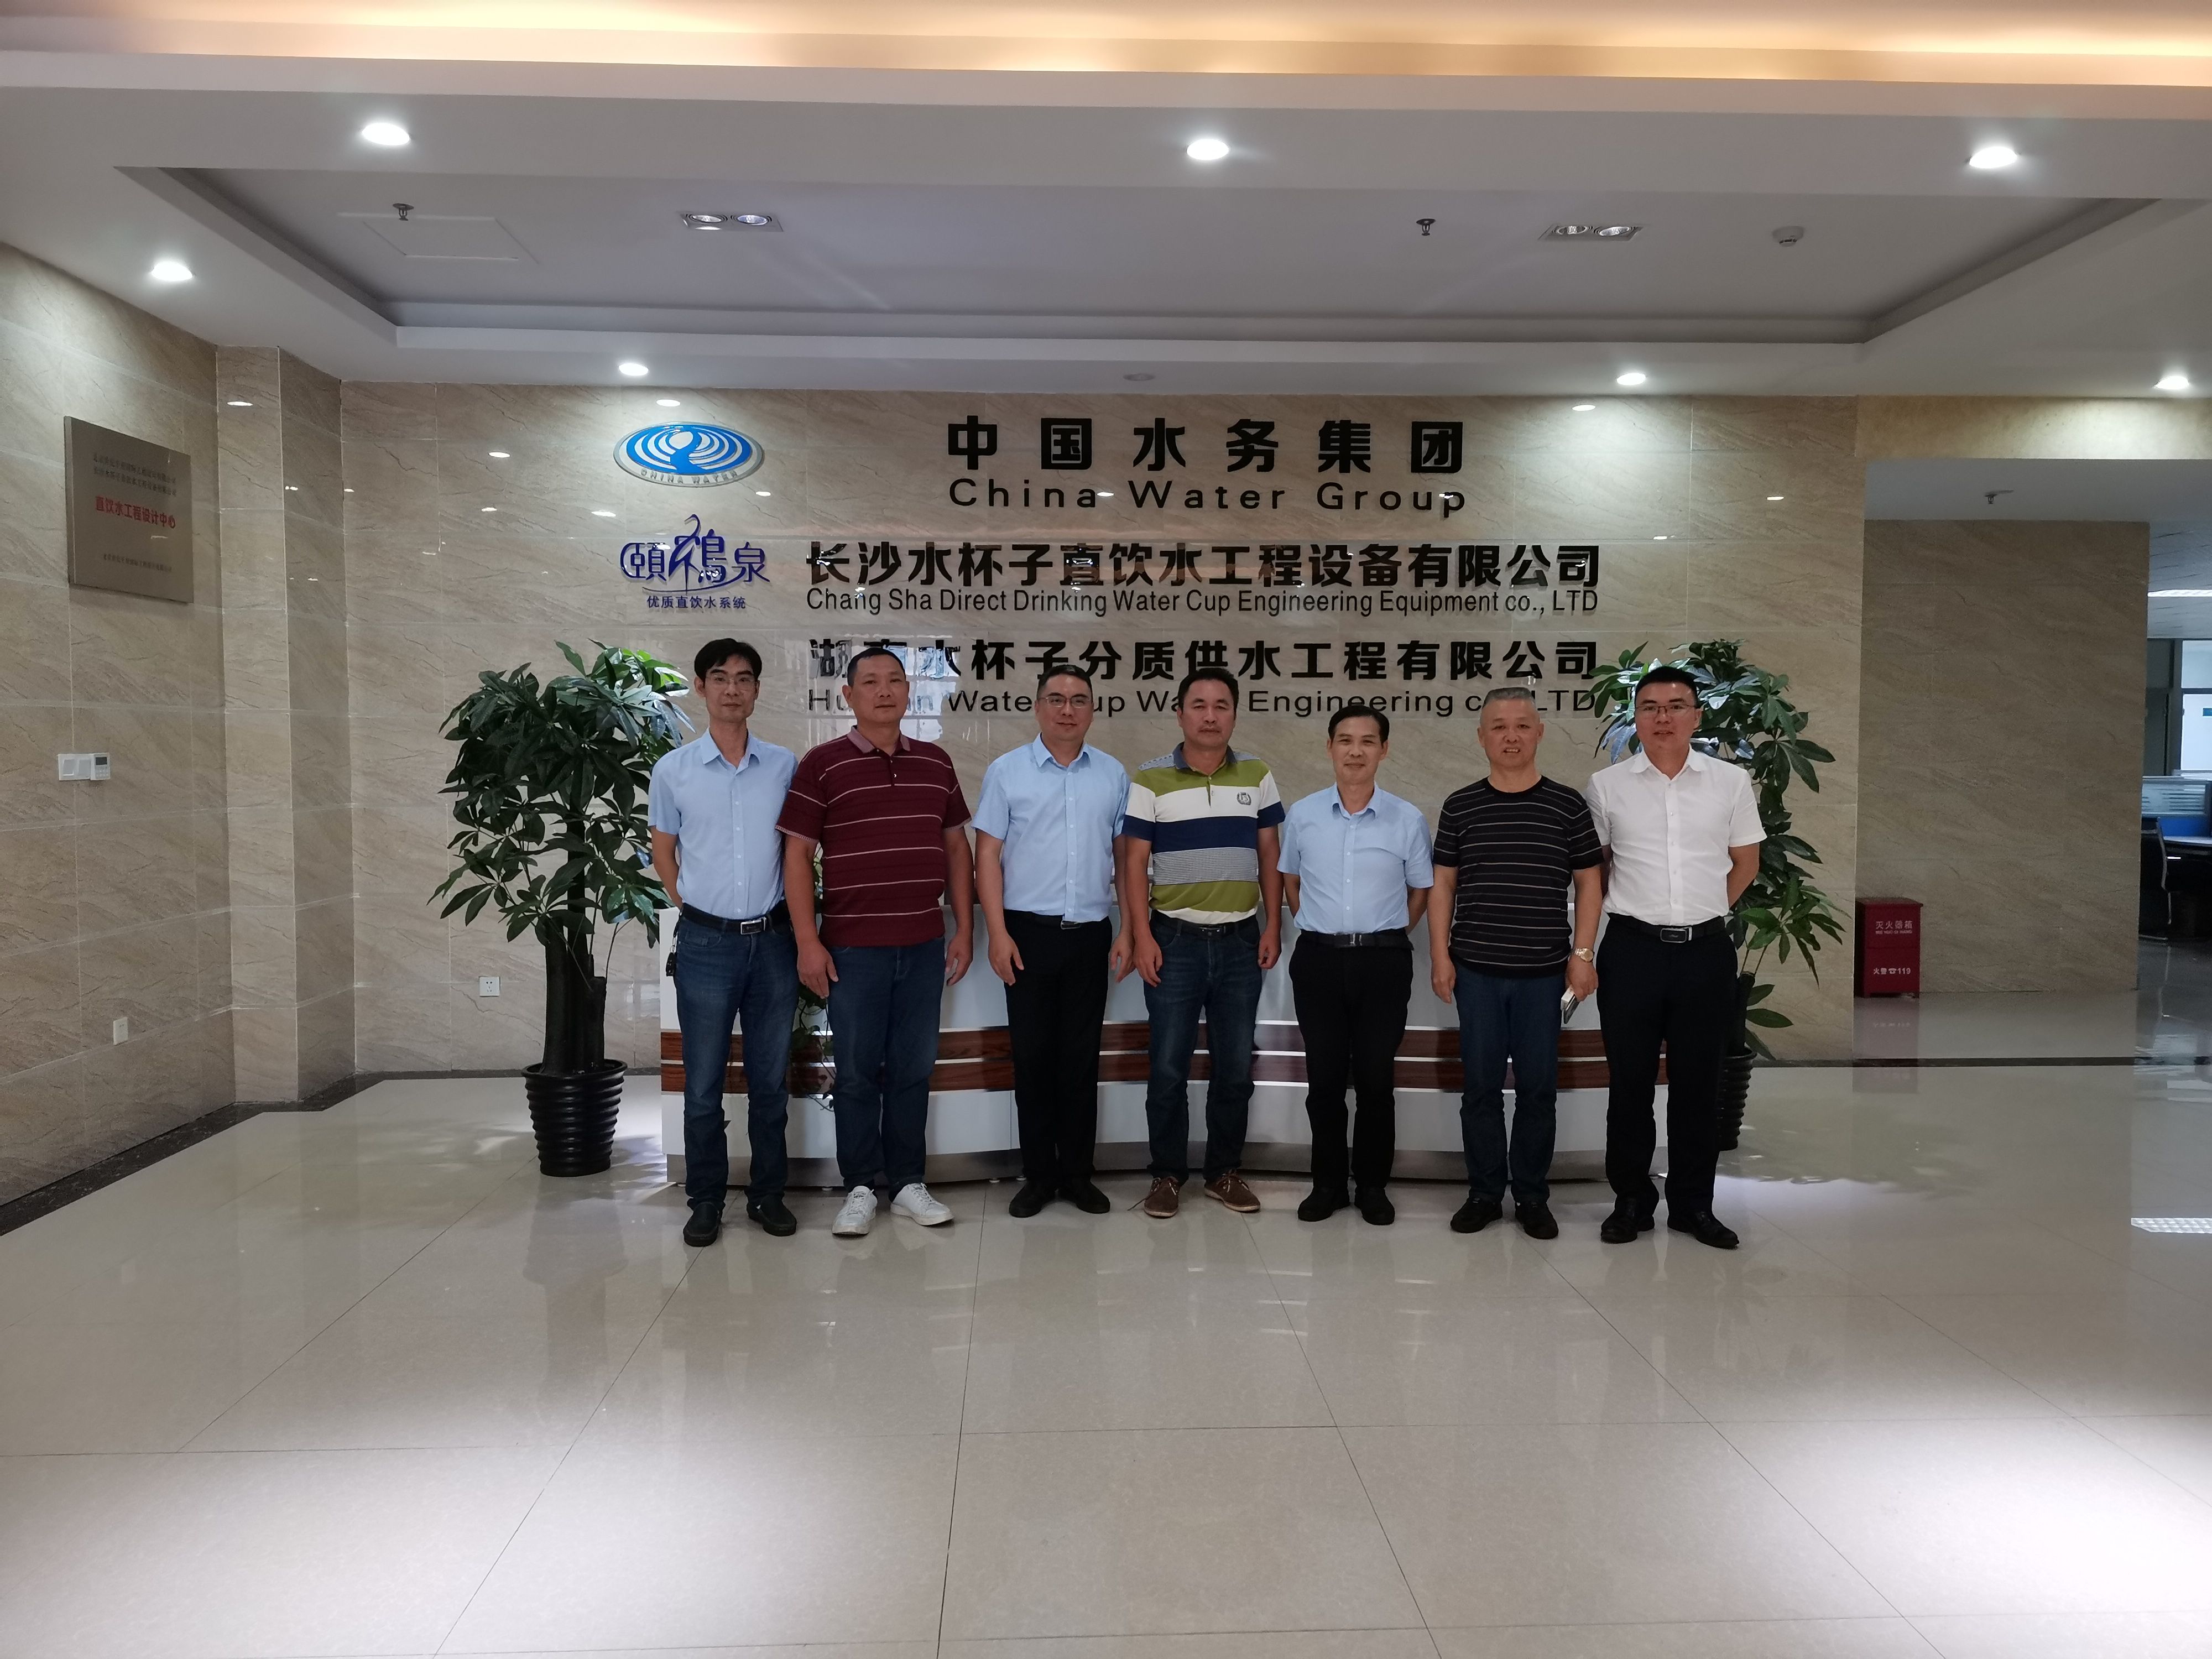 Leaders of Lianyuan Water Supply Company Visited the Company for Inspection and Guidance